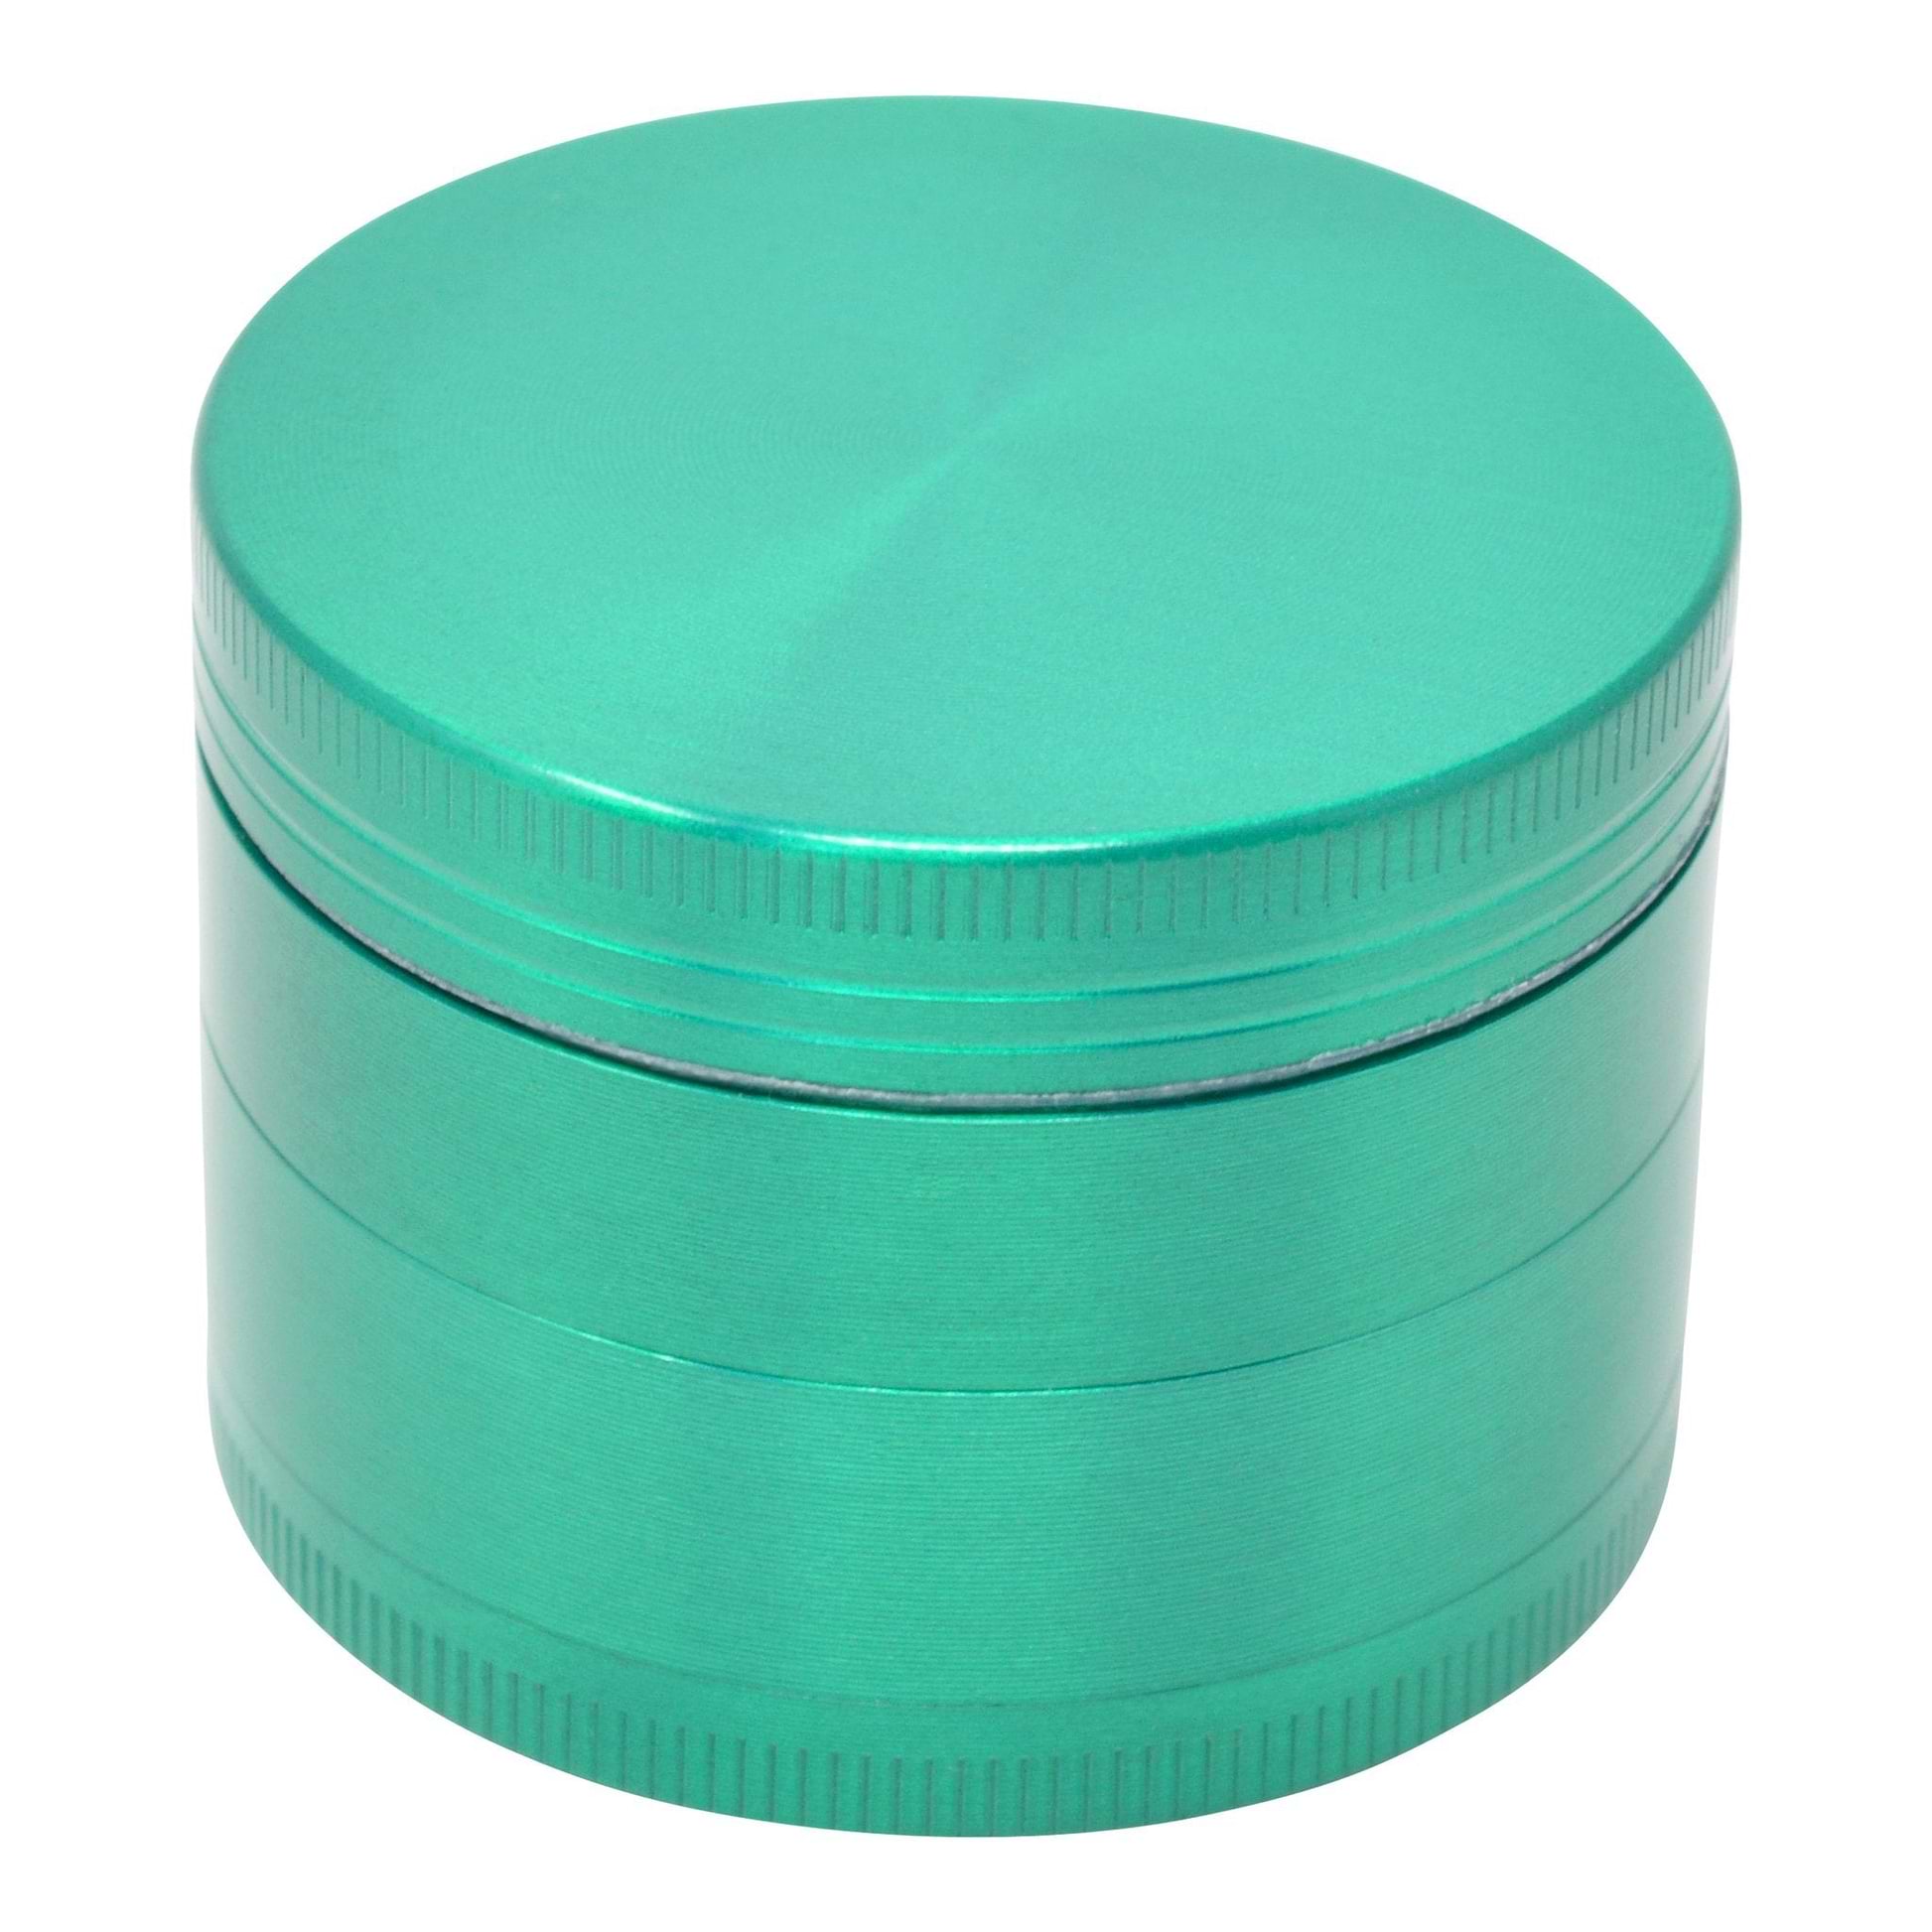 Full high angle shot of green colored 46mm metal grinder smoking accessory closed grinder container